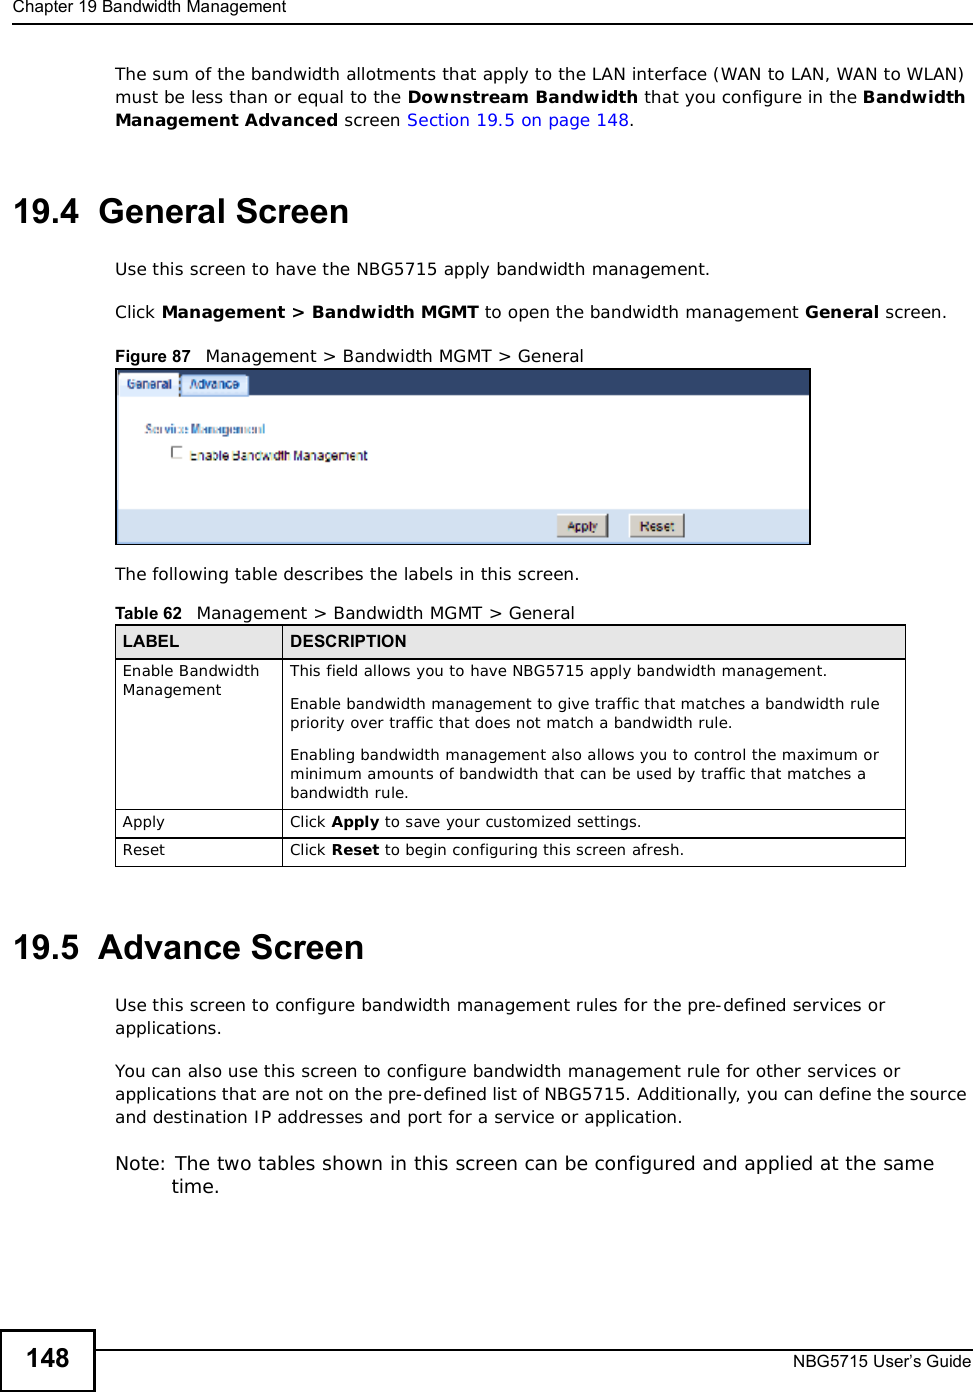 Chapter 19Bandwidth ManagementNBG5715 User’s Guide148The sum of the bandwidth allotments that apply to the LAN interface (WAN to LAN, WAN to WLAN) must be less than or equal to the Downstream Bandwidth that you configure in the Bandwidth ManagementAdvanced screen Section 19.5 on page 148.19.4  General Screen Use this screen to have the NBG5715 apply bandwidth management.Click Management&gt; Bandwidth MGMT to open the bandwidth management General screen.Figure 87   Management &gt; Bandwidth MGMT &gt; General   The following table describes the labels in this screen.19.5  Advance Screen Use this screen to configure bandwidth management rules for the pre-defined services or applications. You can also use this screen to configure bandwidth management rule for other services or applications that are not on the pre-defined list of NBG5715. Additionally, you can define the source and destination IP addresses and port for a service or application.Note: The two tables shown in this screen can be configured and applied at the same time. Table 62   Management &gt; Bandwidth MGMT &gt; GeneralLABEL DESCRIPTIONEnable Bandwidth Management  This field allows you to have NBG5715 apply bandwidth management. Enable bandwidth management to give traffic that matches a bandwidth rule priority over traffic that does not match a bandwidth rule. Enabling bandwidth management also allows you to control the maximum or minimum amounts of bandwidth that can be used by traffic that matches a bandwidth rule. Apply Click Apply to save your customized settings.Reset Click Reset to begin configuring this screen afresh.